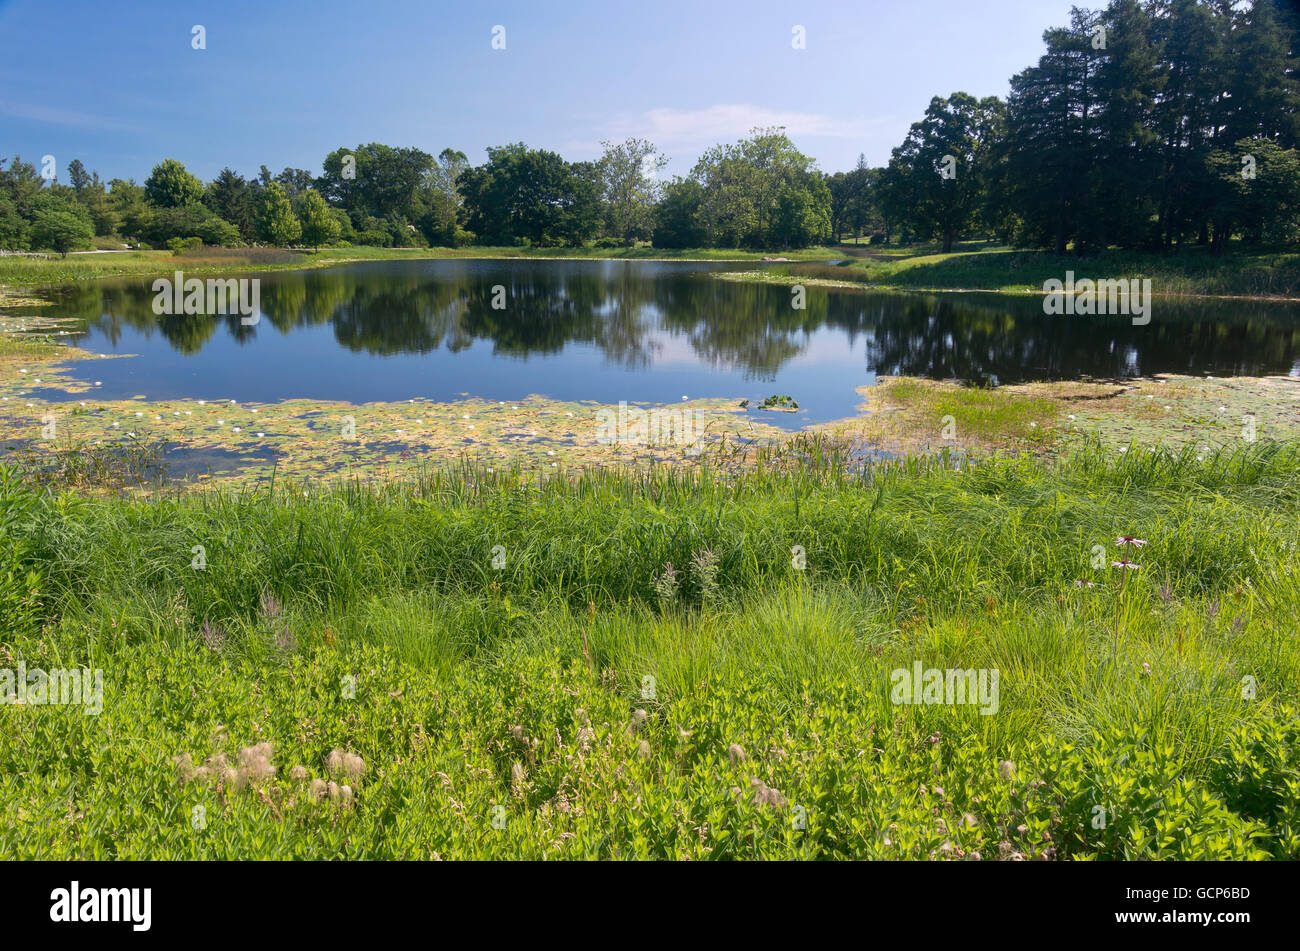 landscape of marshes and lake surrounded by trees of arboretum in lisle illinois Stock Photo